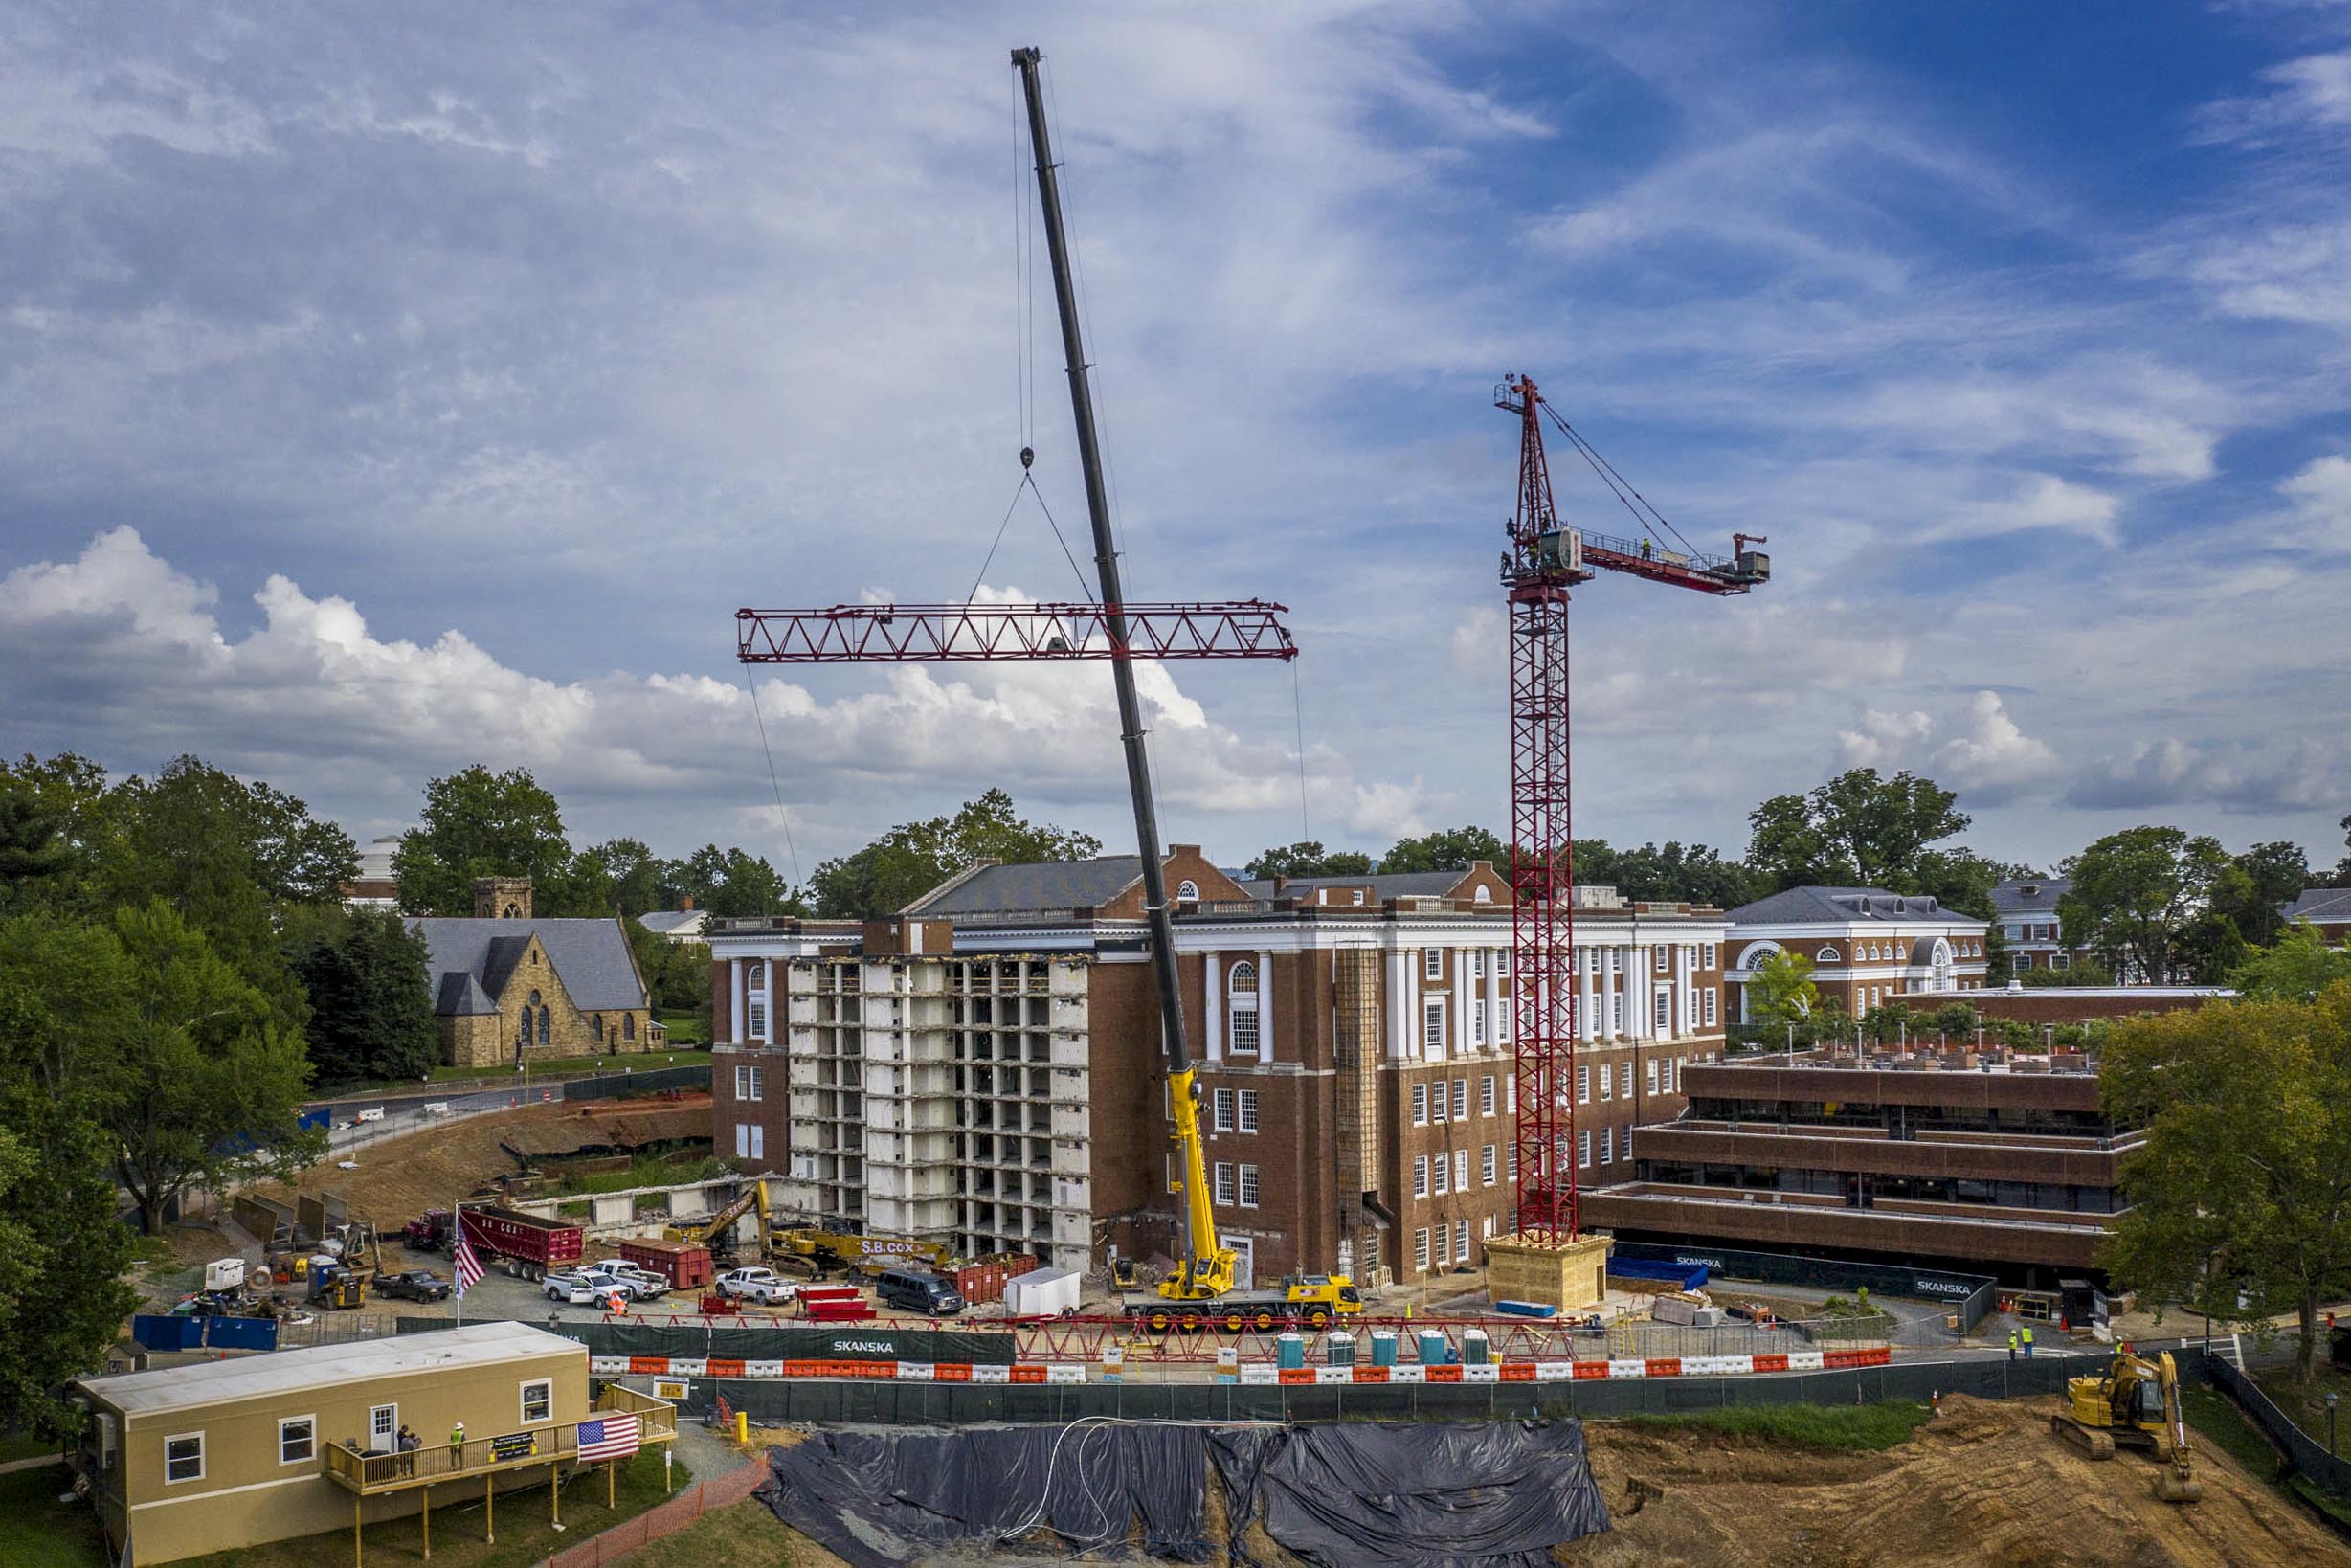 Active construction of the Alderman Library